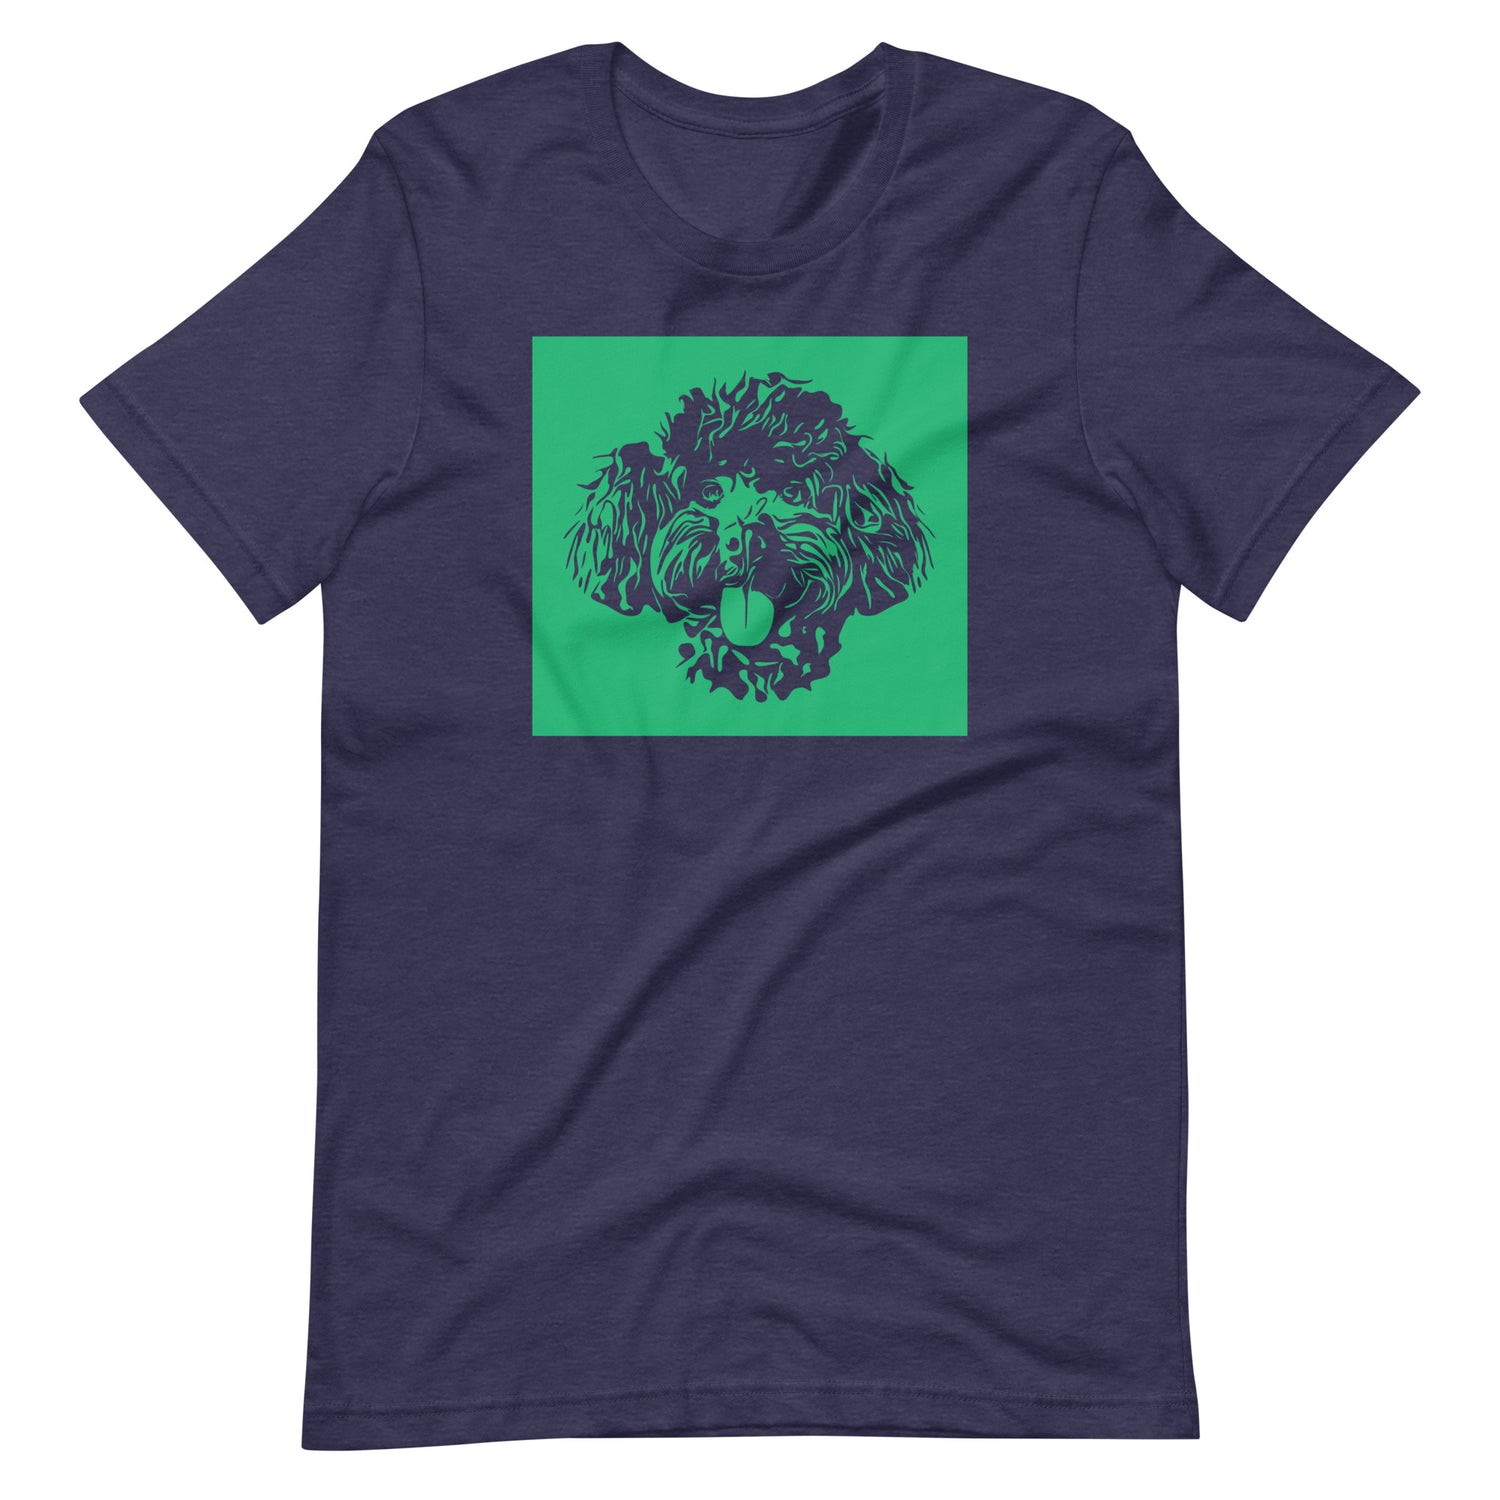 Toy Poodle face silhouette with green background square on unisex heather midnight navy t-shirt